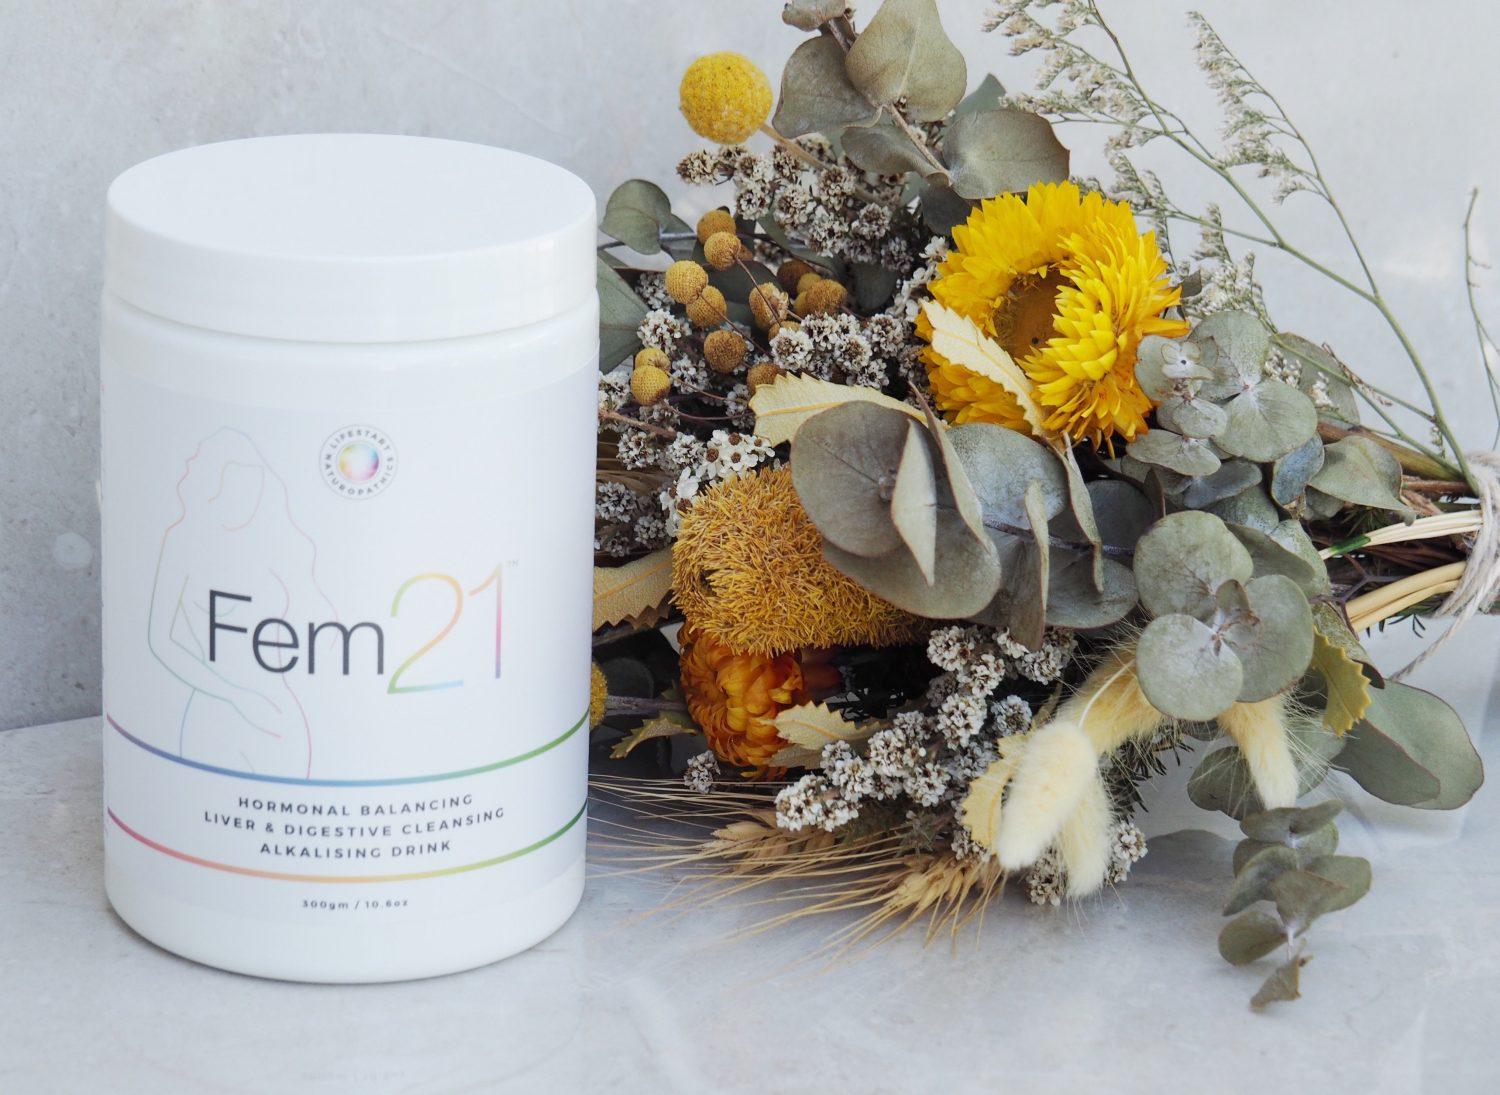 Fem 21 Product Review